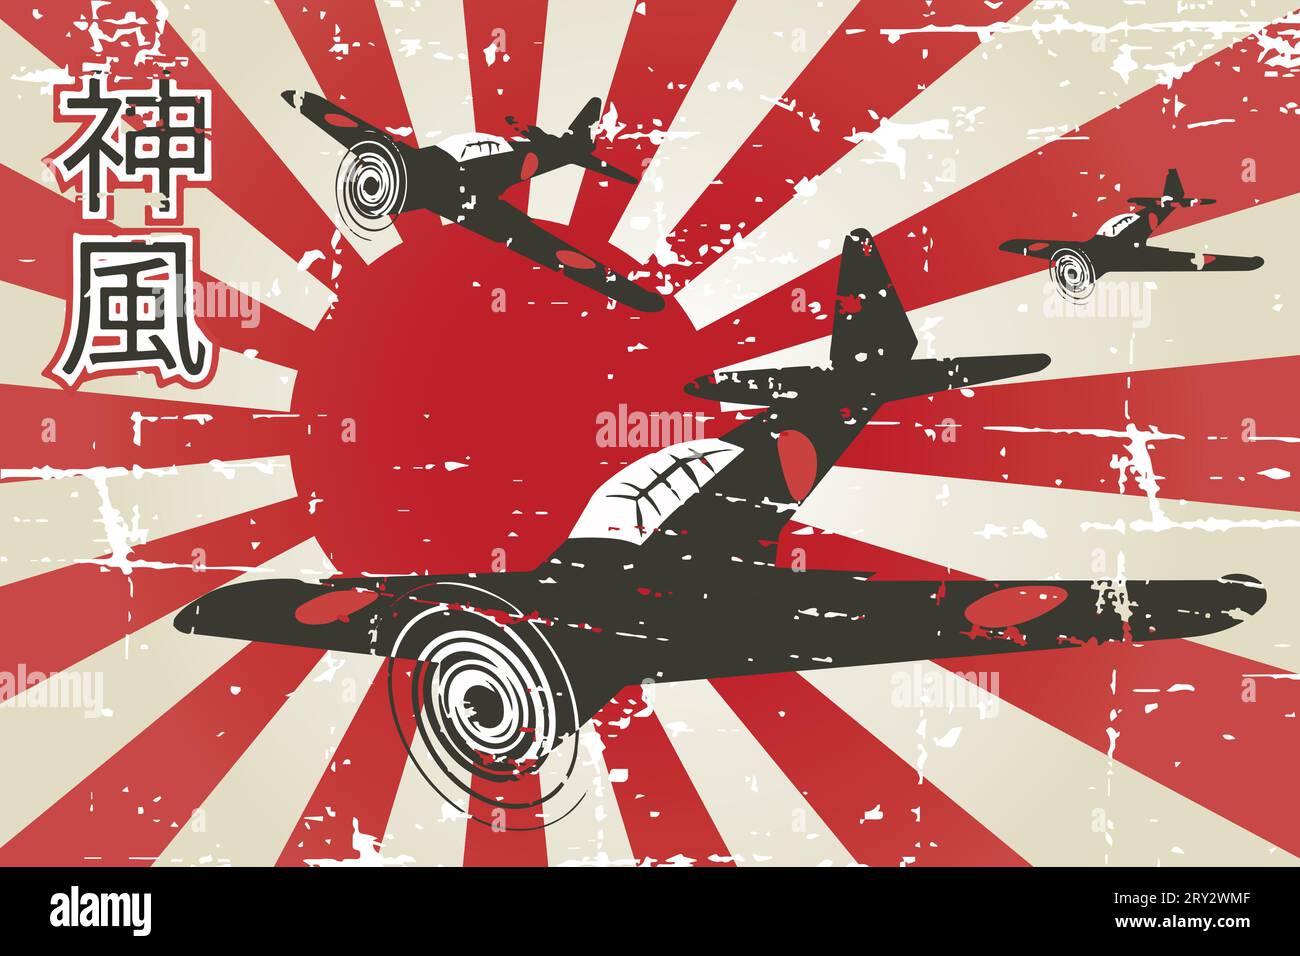 Grunge 'Kamikaze' poster.Japanese imperial flag in the background Stock Vector